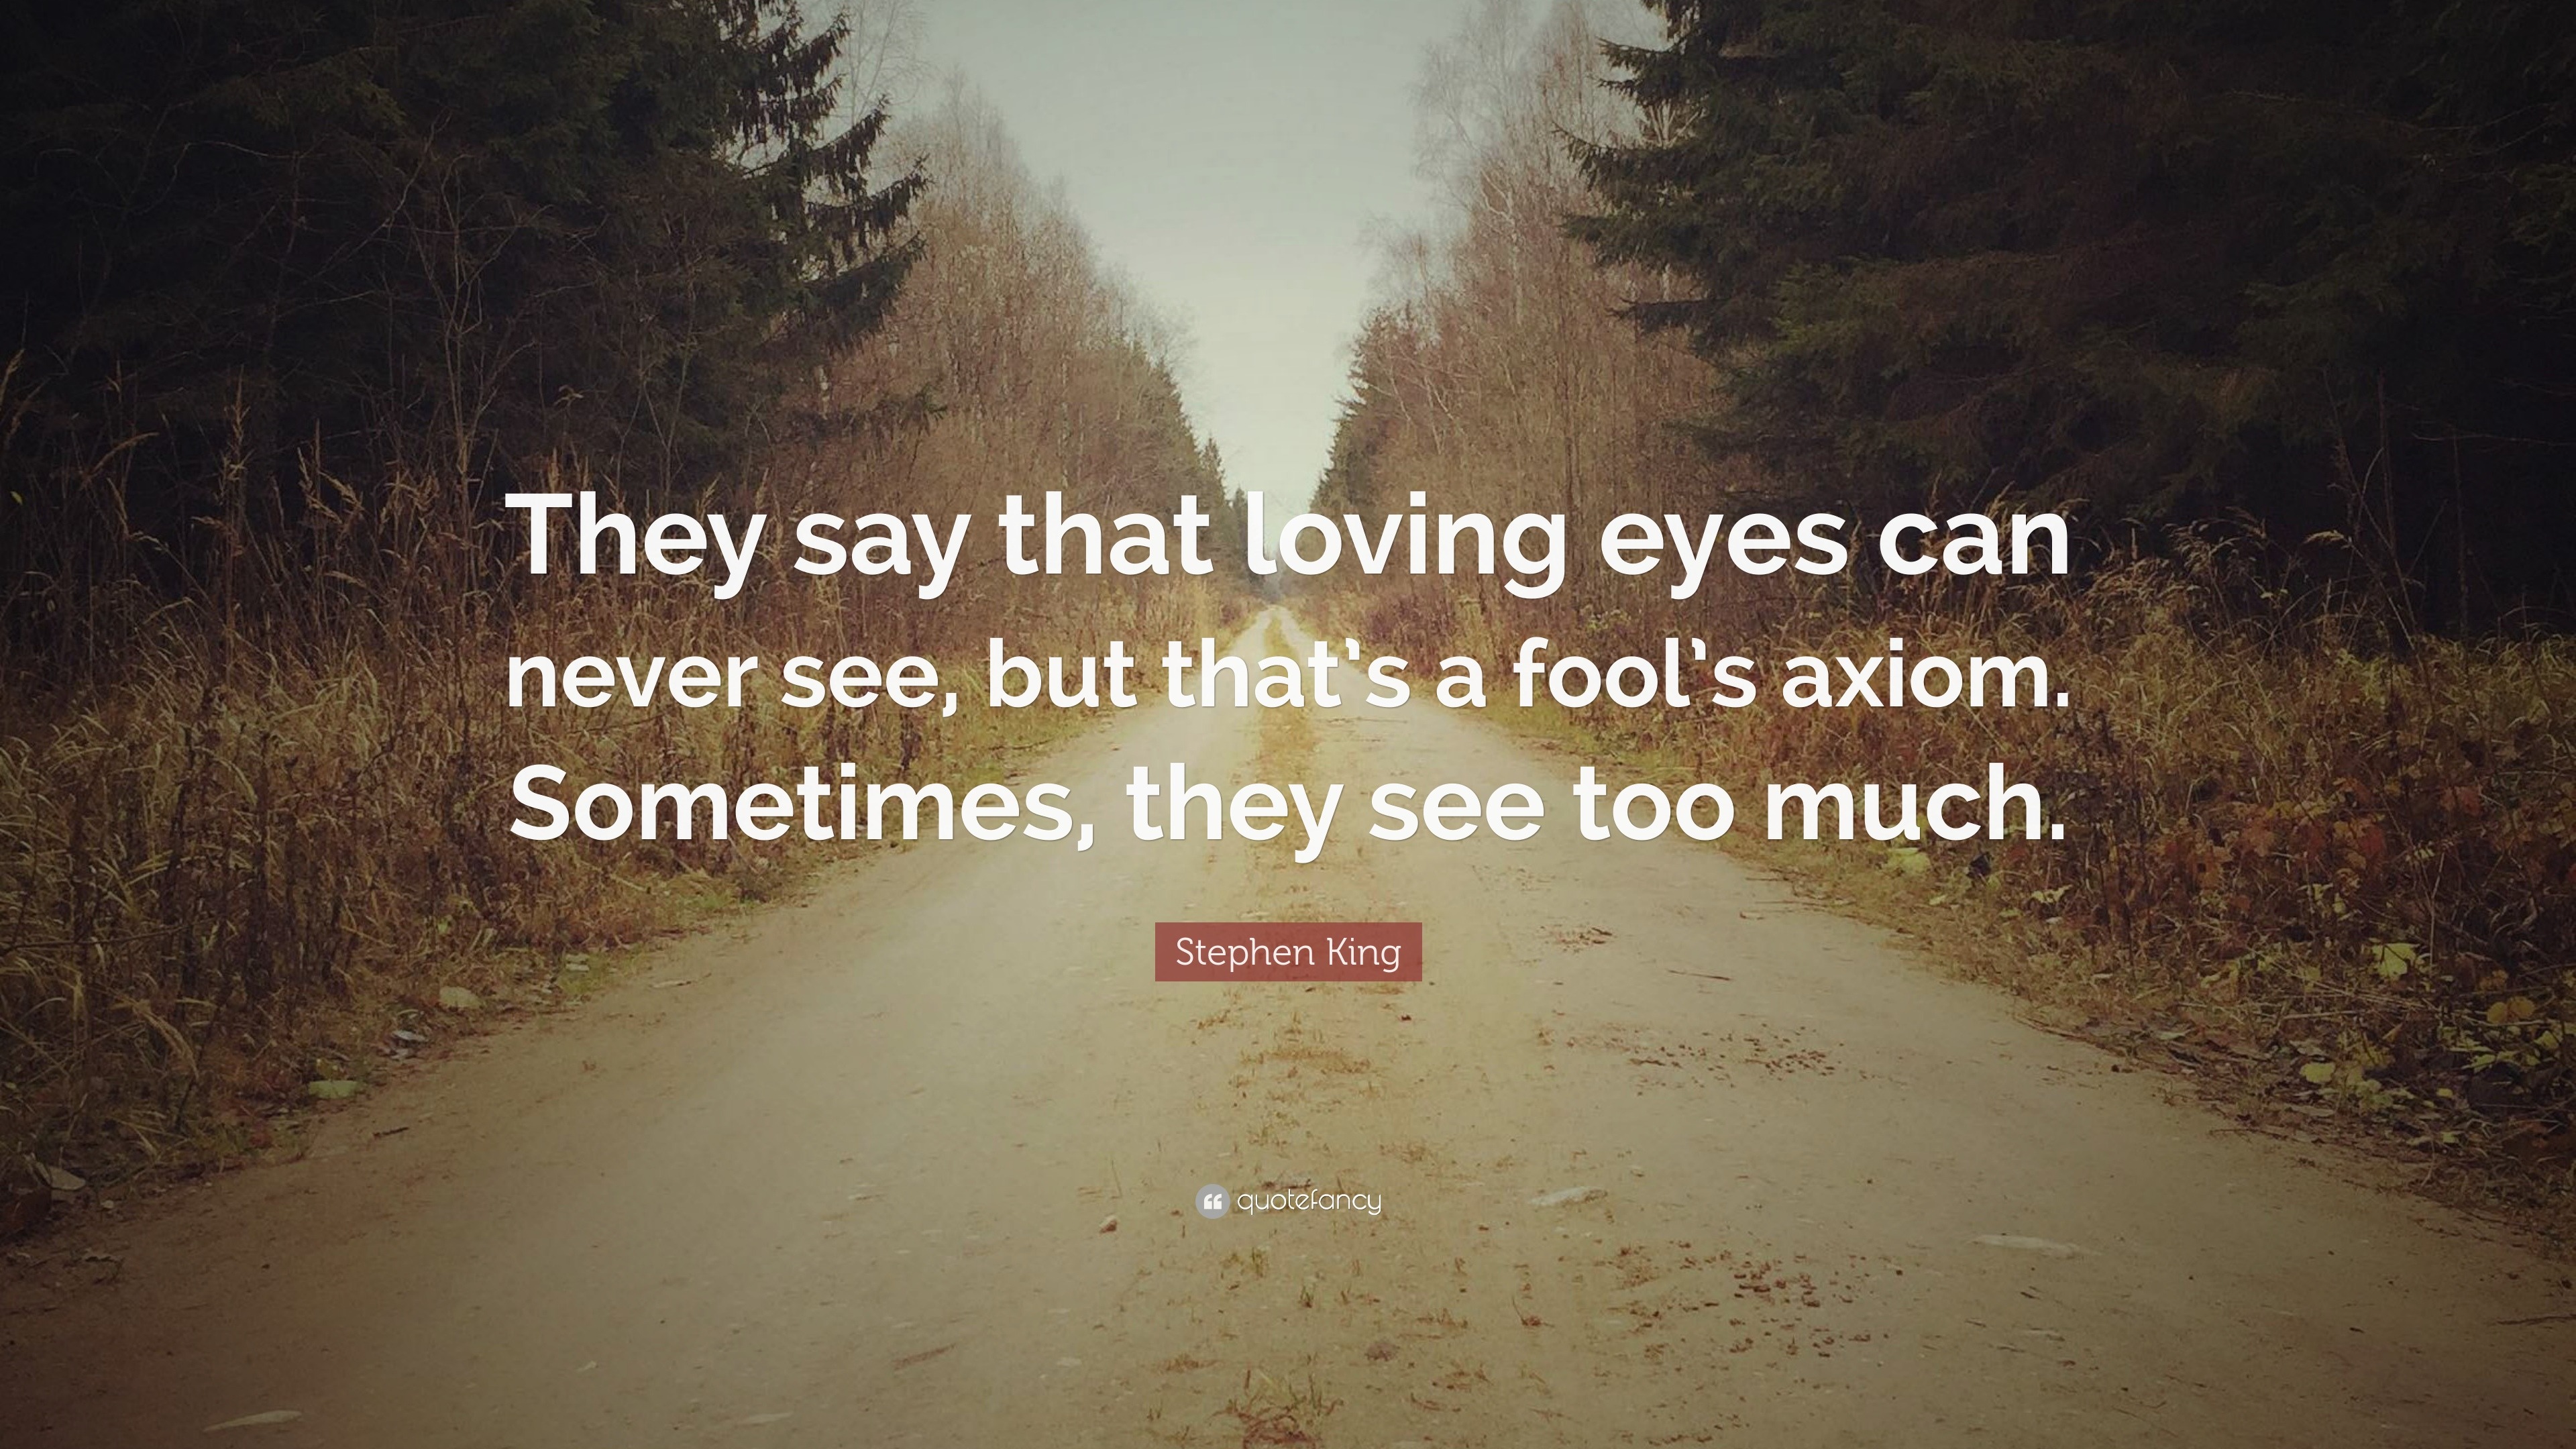 Stephen King Quote “They say that loving eyes can never see but that s